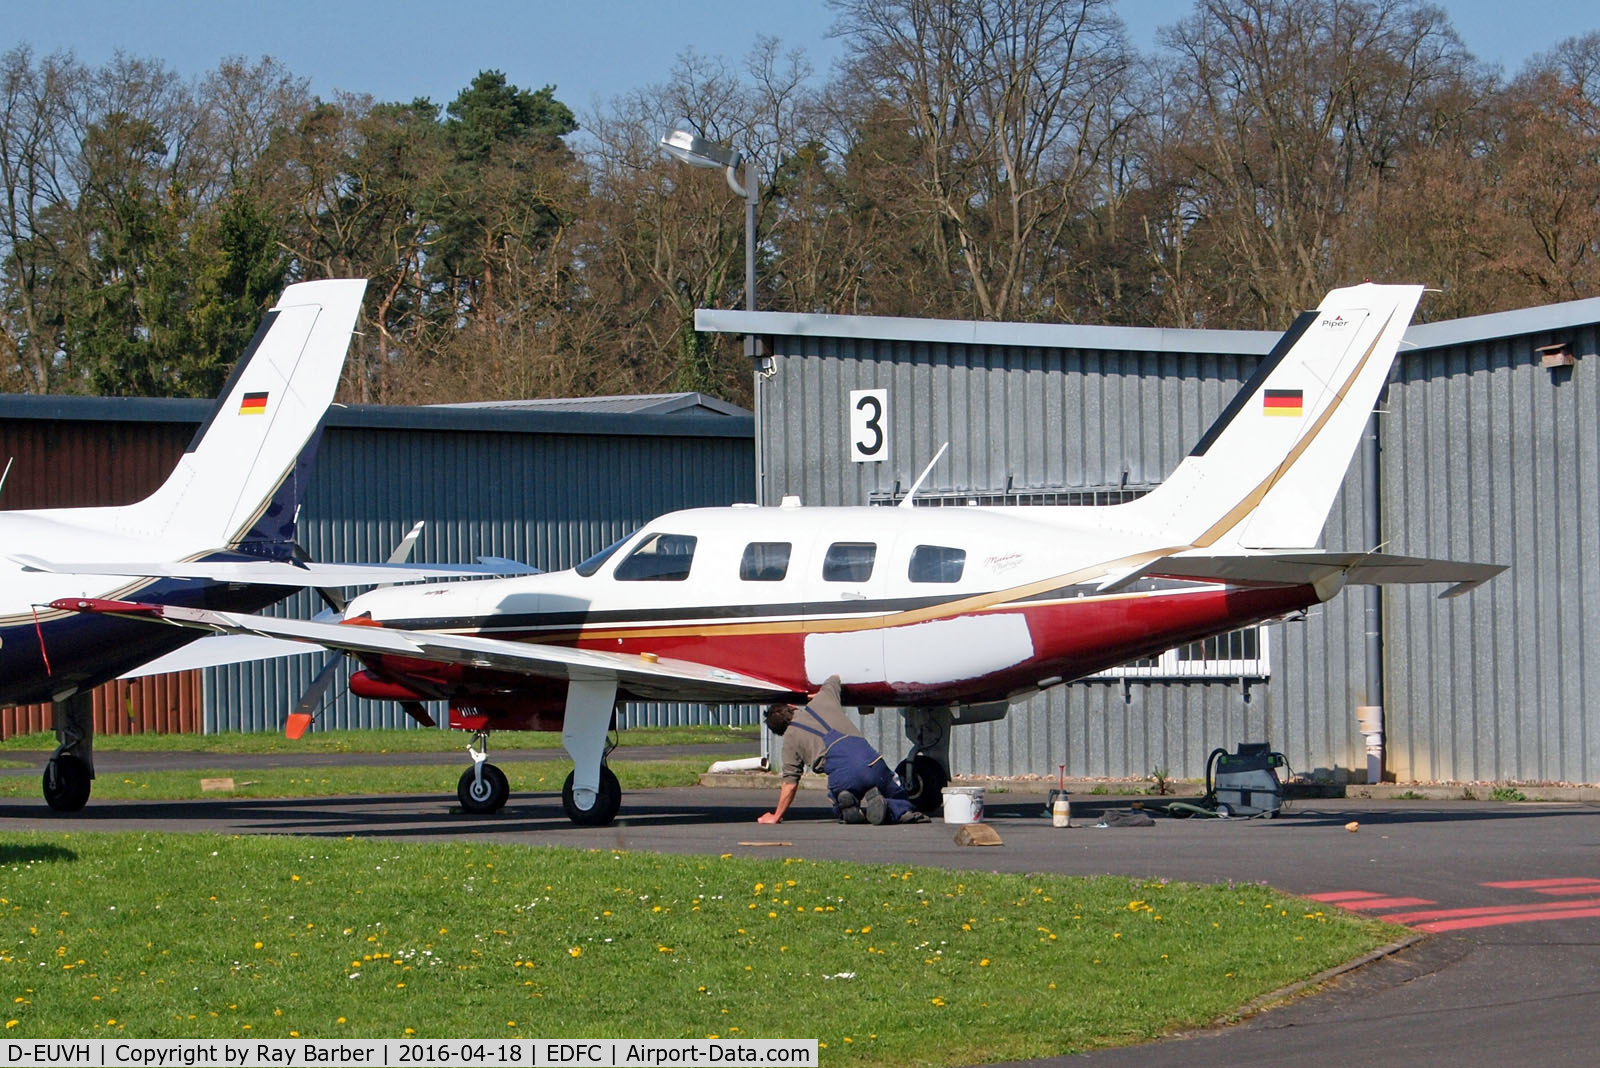 D-EUVH, Piper PA-46-350P JetPROP DLX Malibu Mirage C/N 4636345, D-EUVH   Piper PA-46-350P Malibu Mirage JetPROP DLX [4636345] Aschaffenburg-Grossostheim~D 18/04/2016 Seen here being prepared for the German register unmarked.